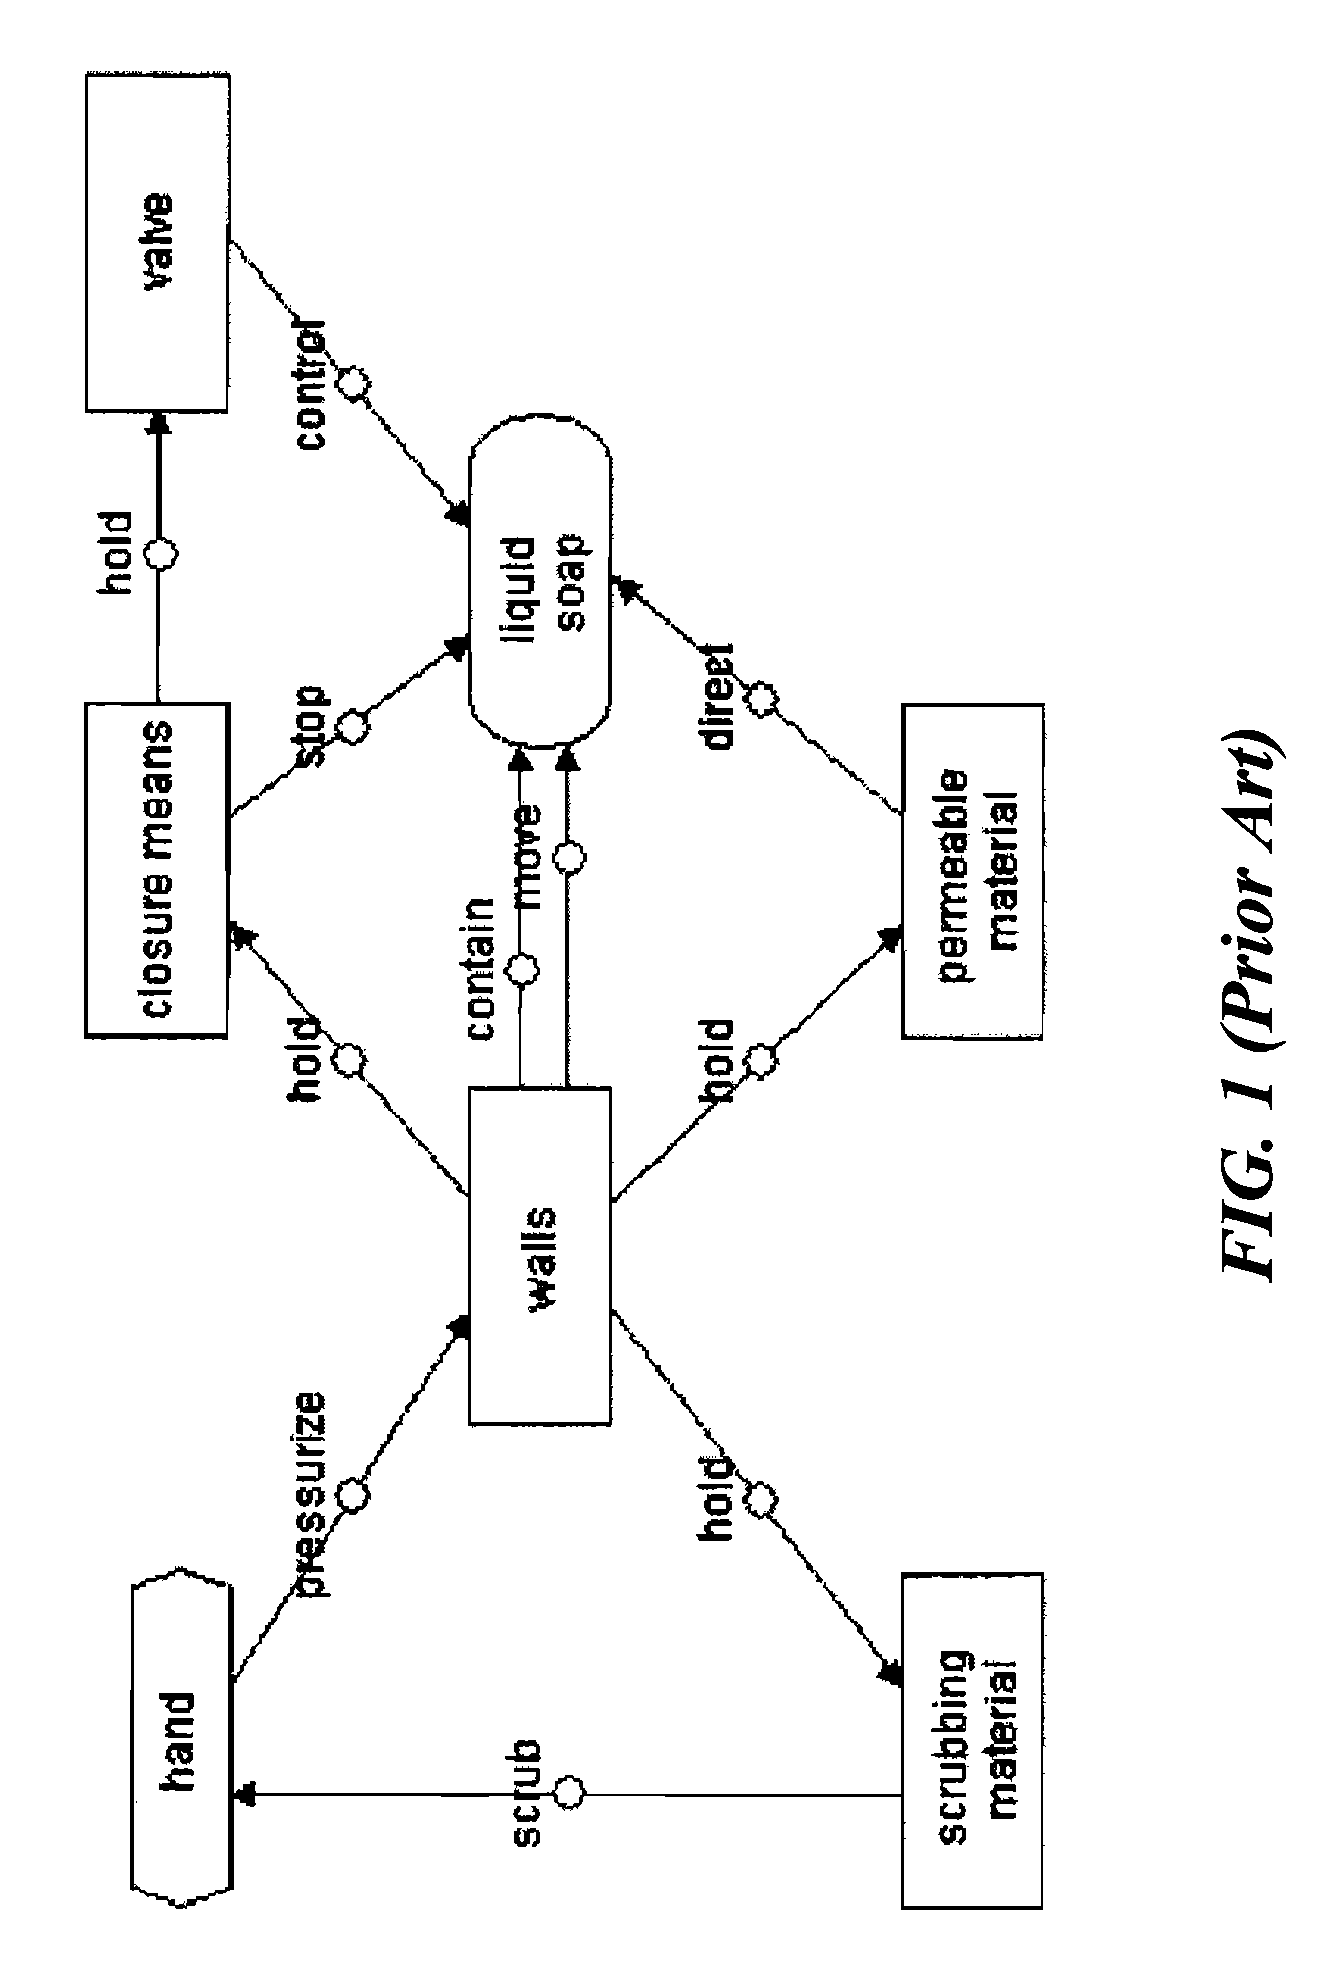 Method for problem formulation and for obtaining solutions from a database